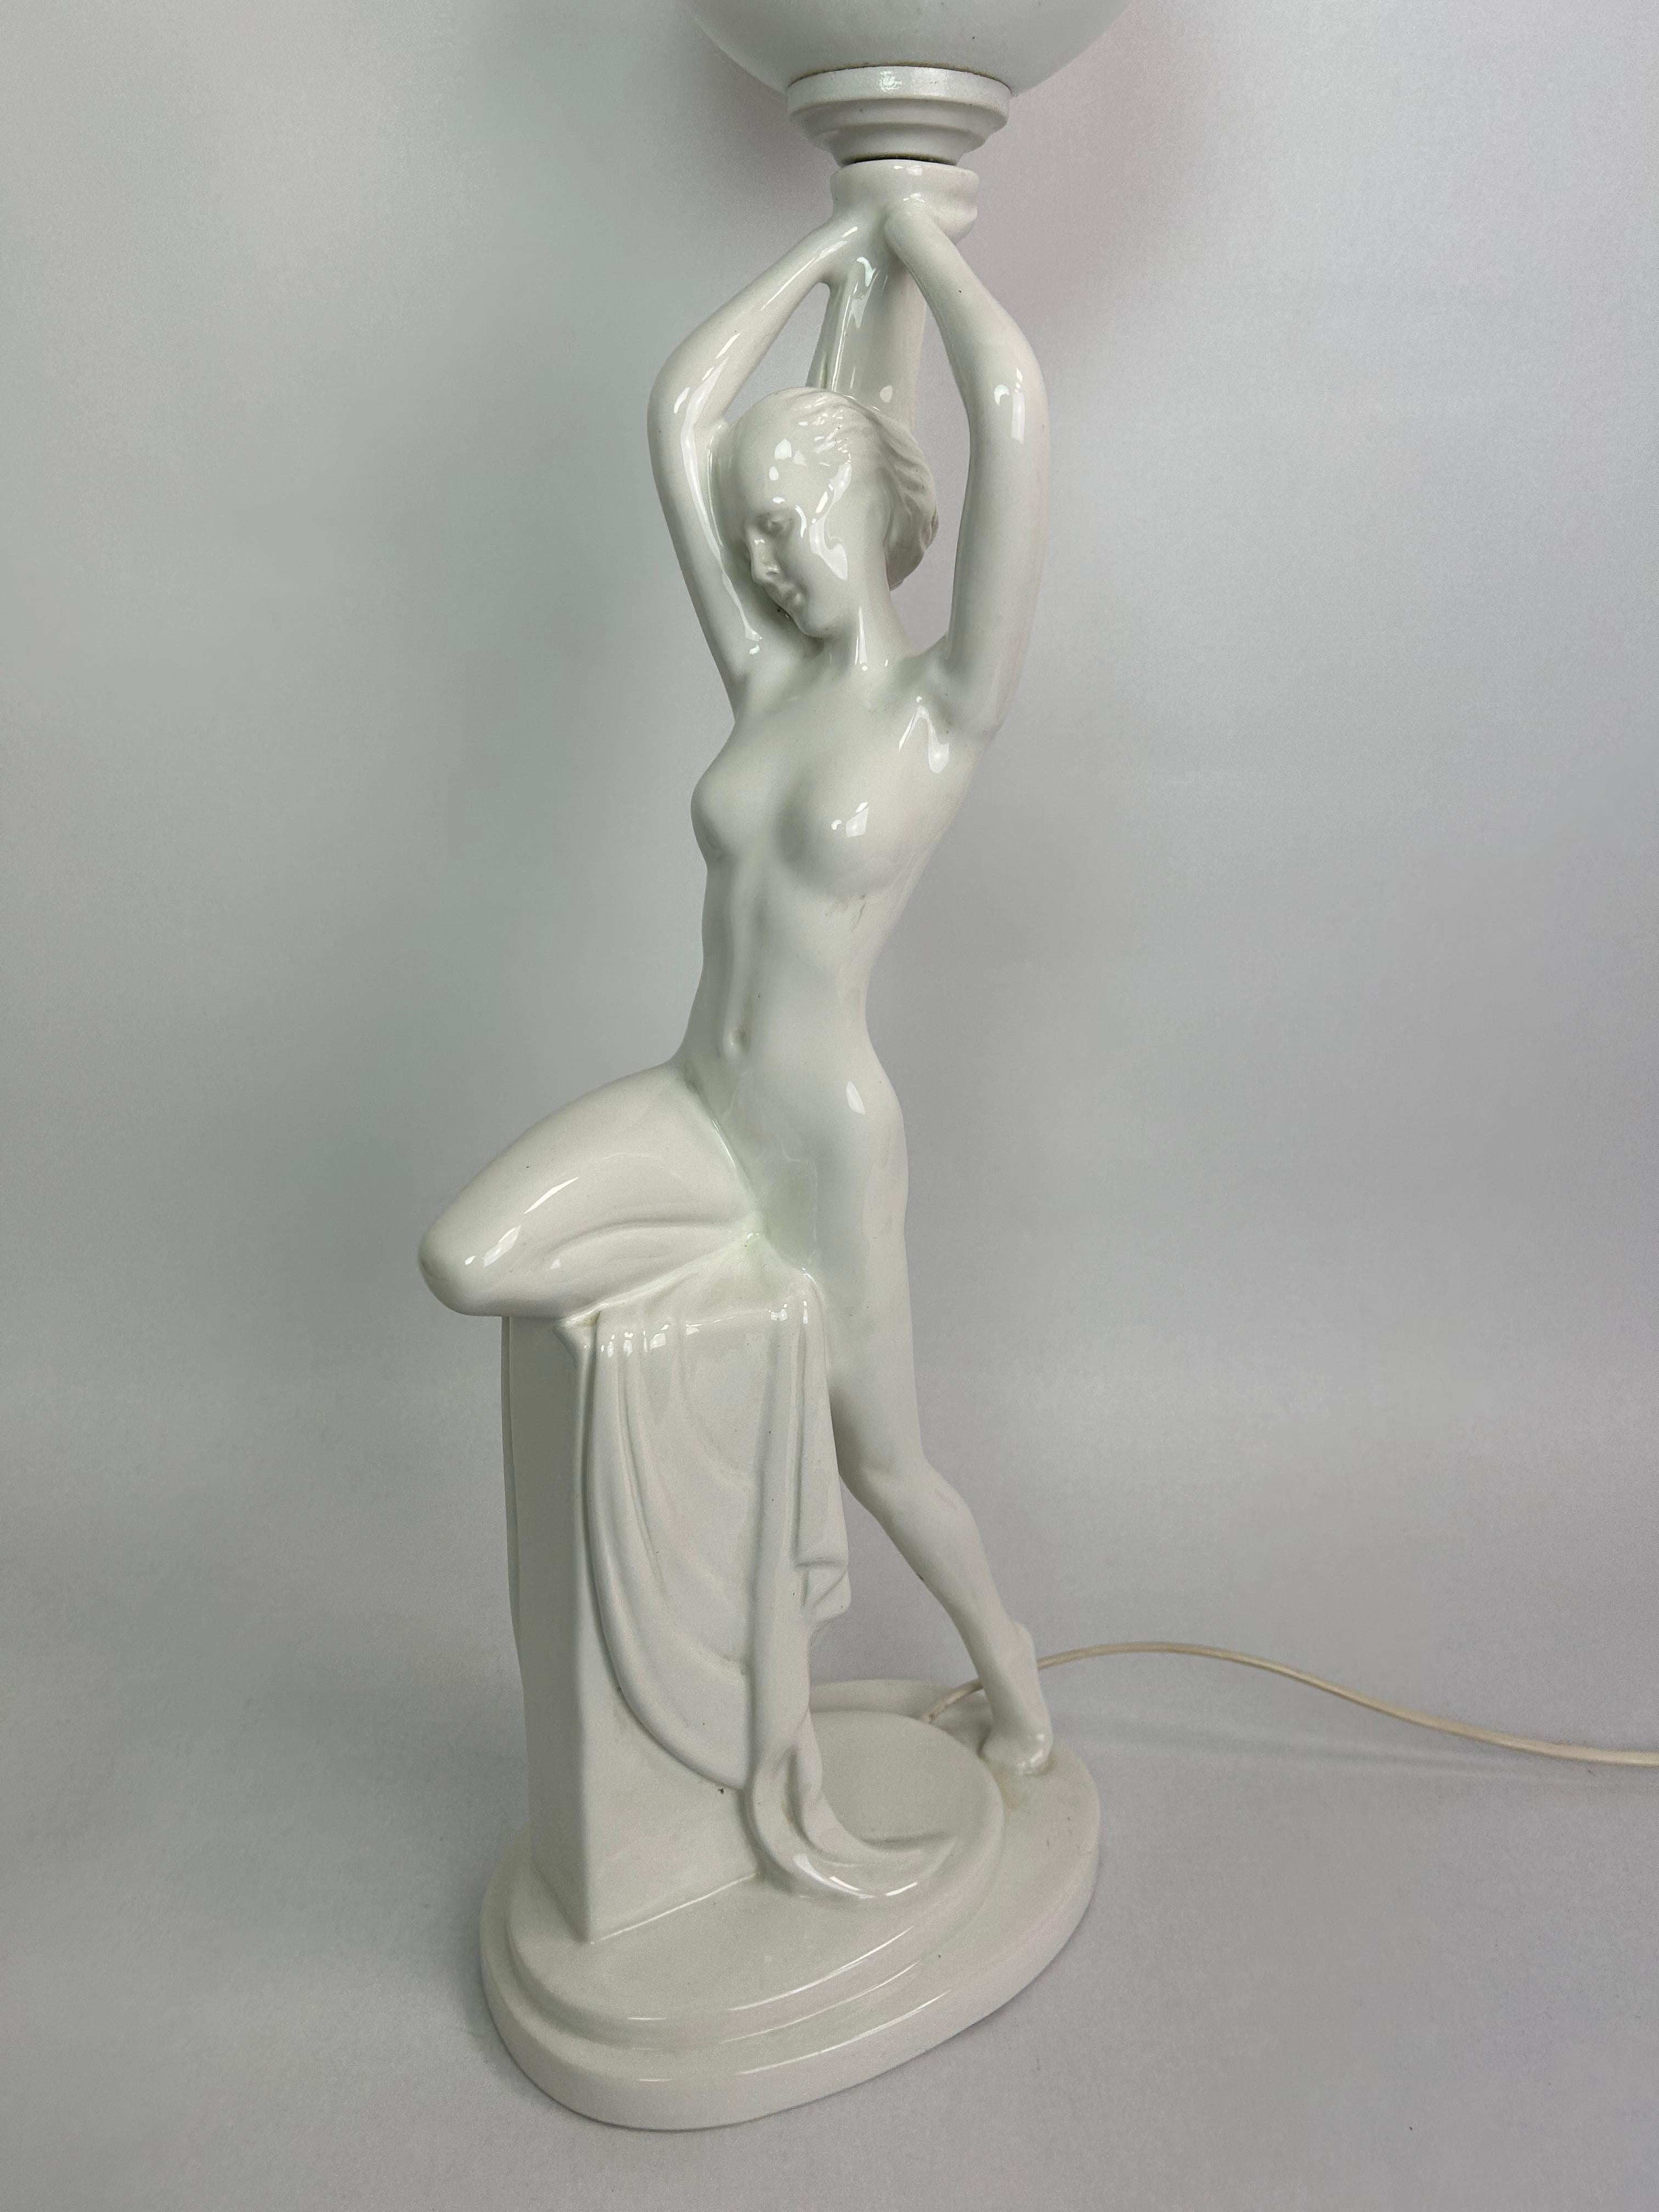 Art deco figural lamp standing nude with opaline glass lampshade.